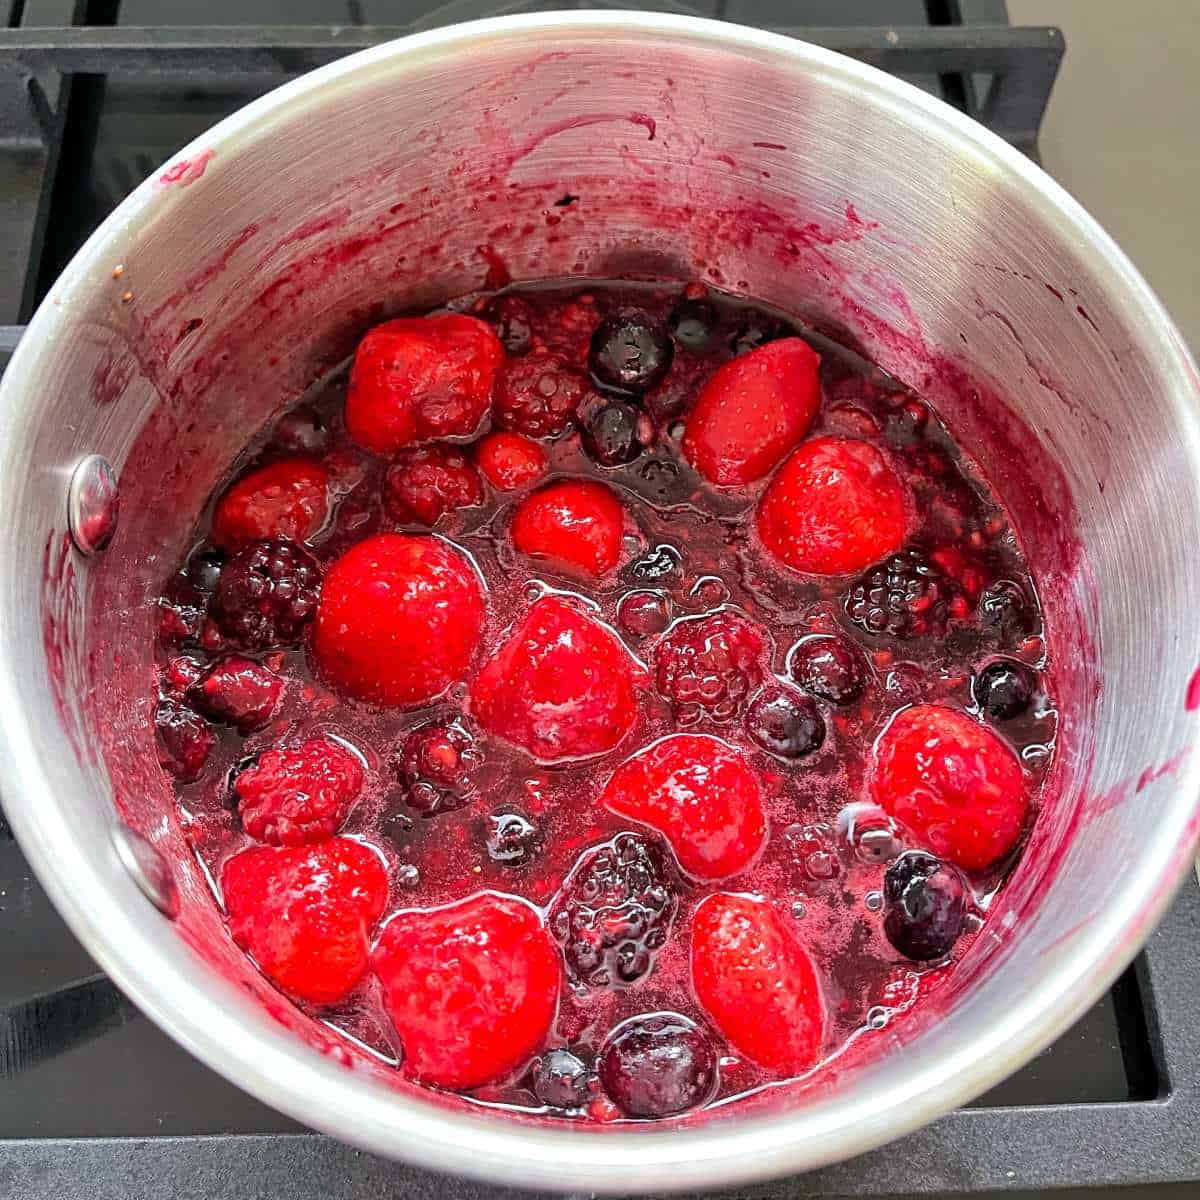 Berries simmering in a saucepan on the stovetop.